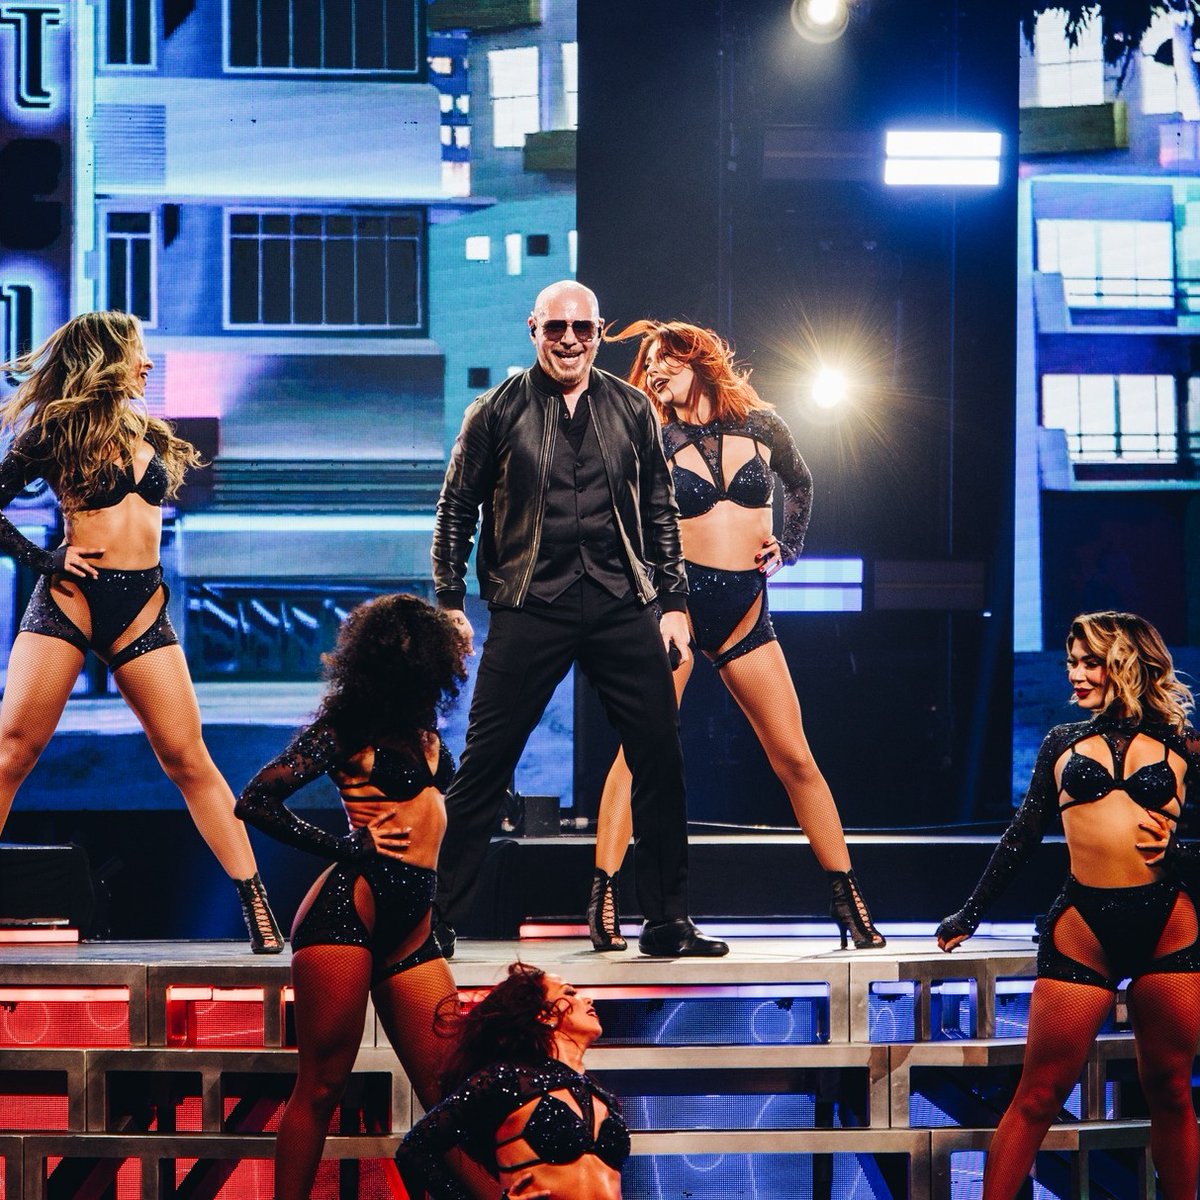 Thank you @Pitbull for bringing the 🔥 to the 954 for two sold out shows! DALE! #CantStopUsNowTour